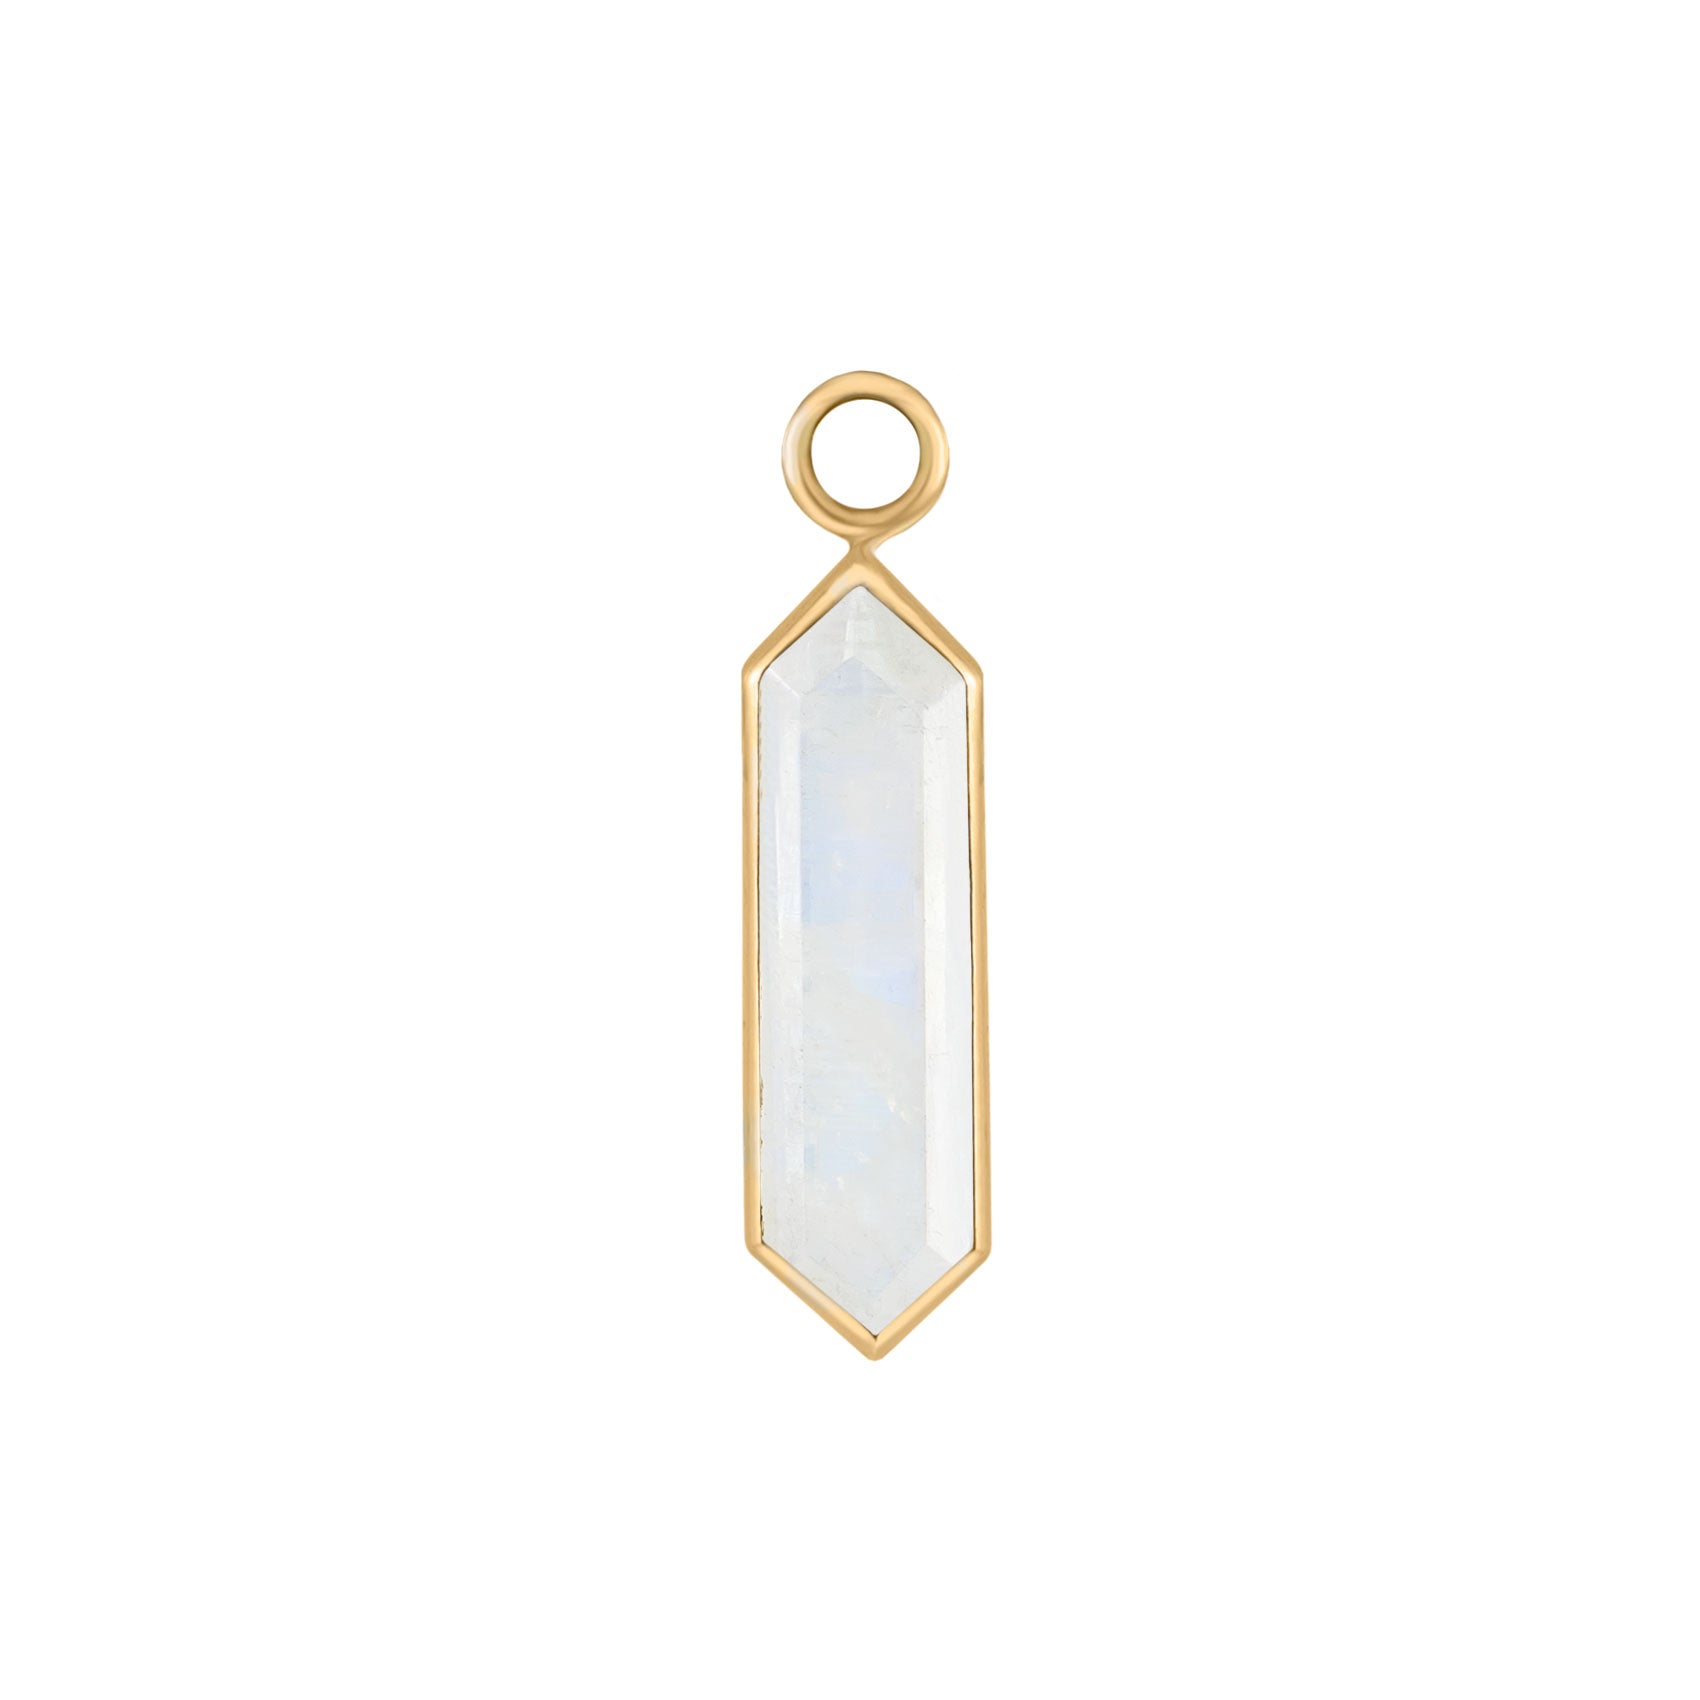 metier by tomfoolery 9ct yellow gold and moonstone hexa plaques.